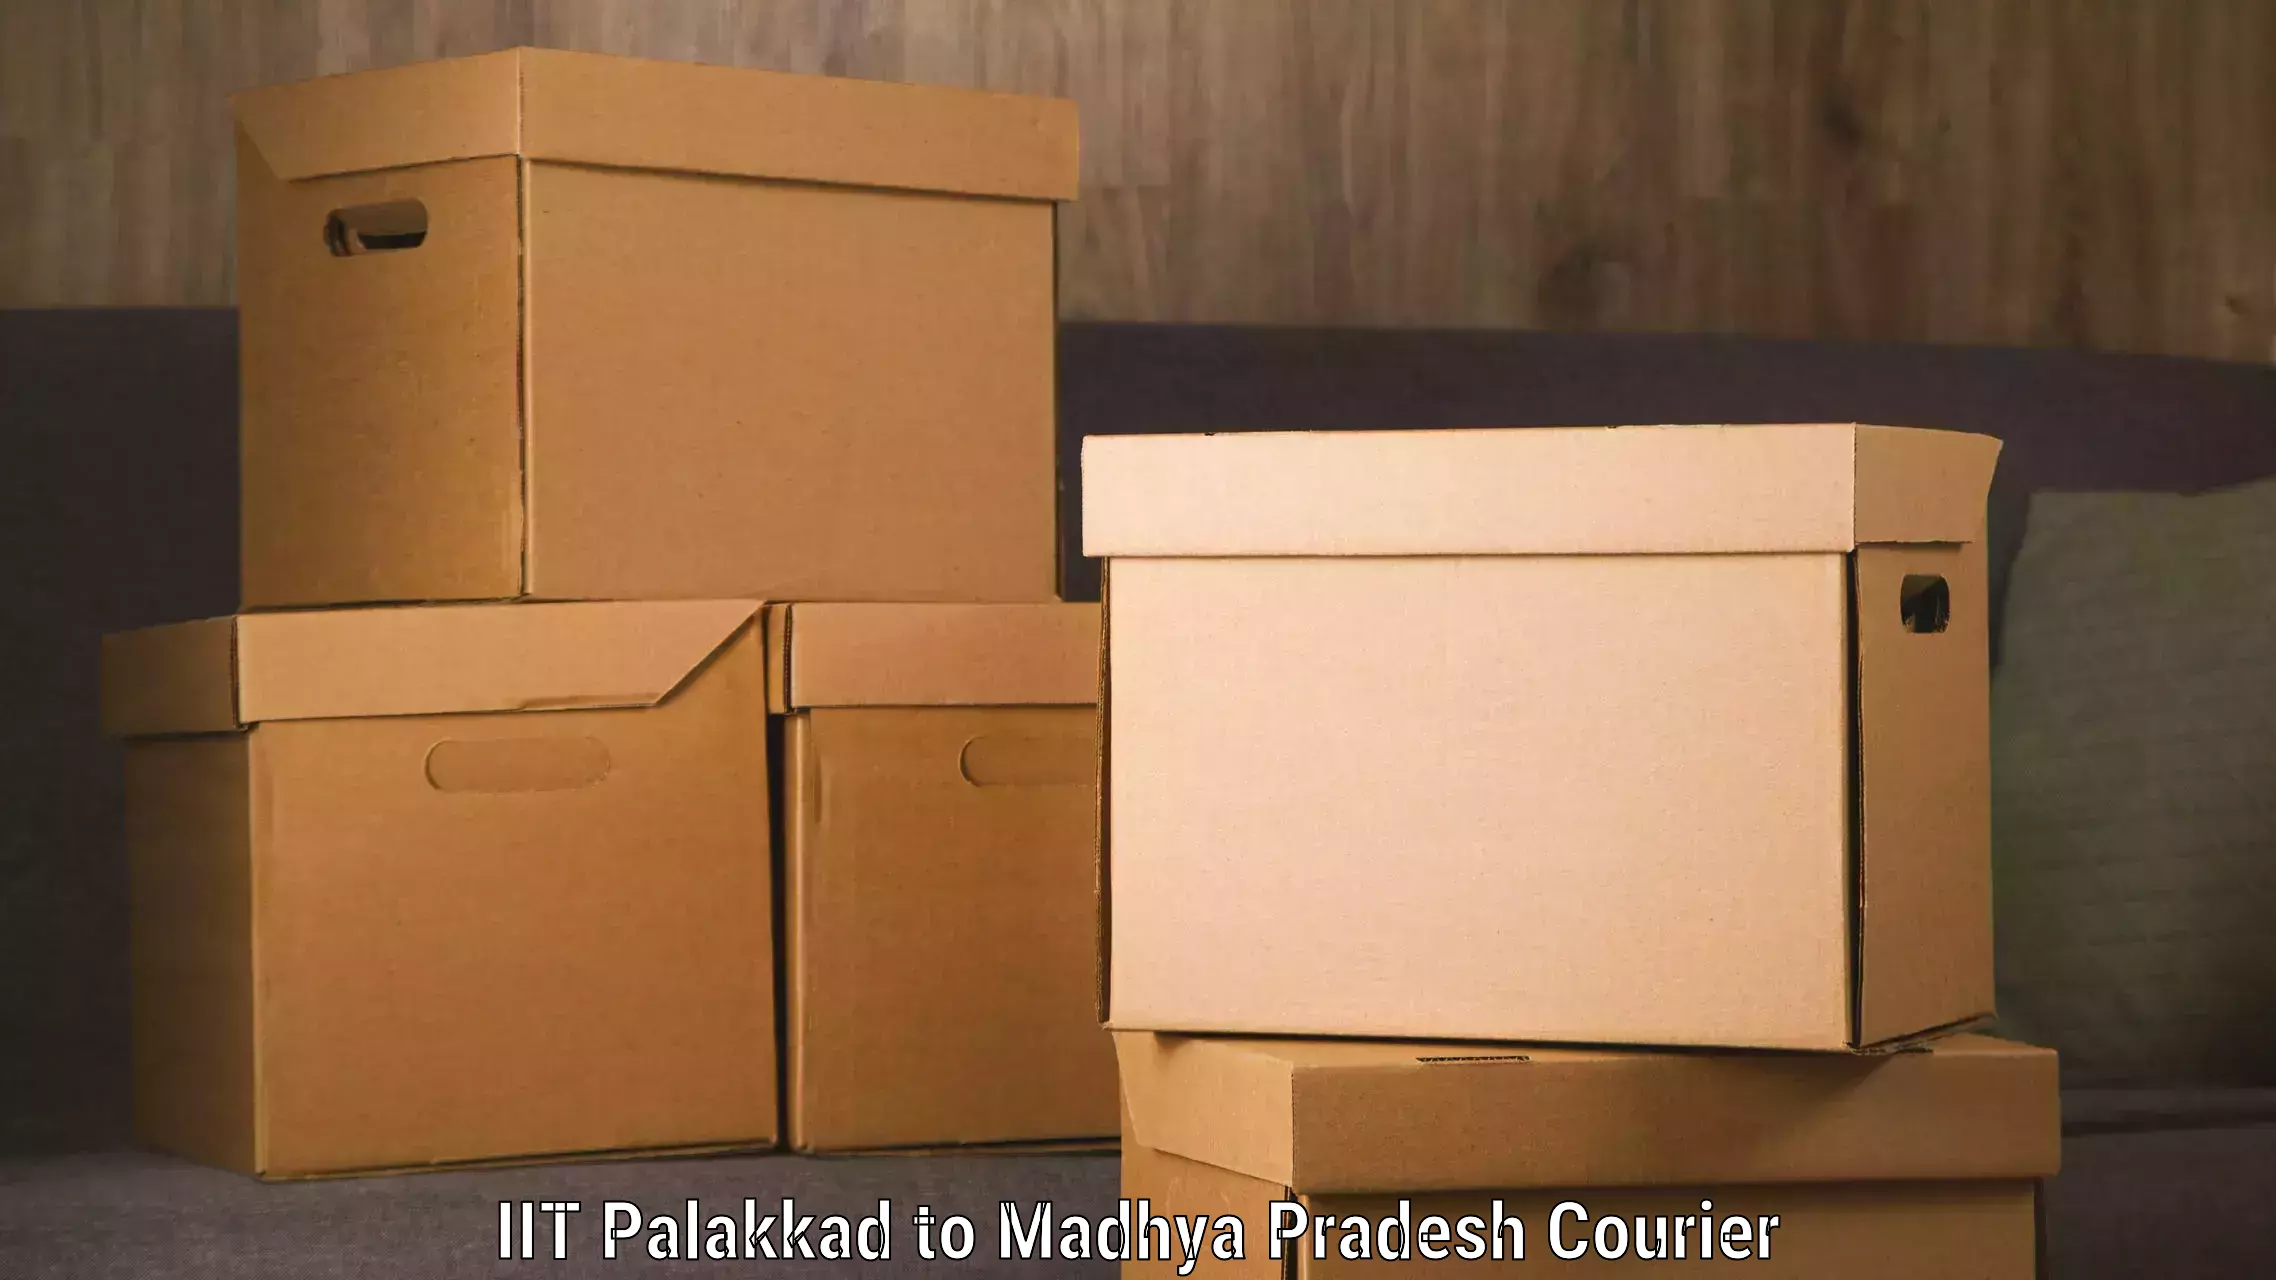 Express delivery solutions IIT Palakkad to Garh Rewa